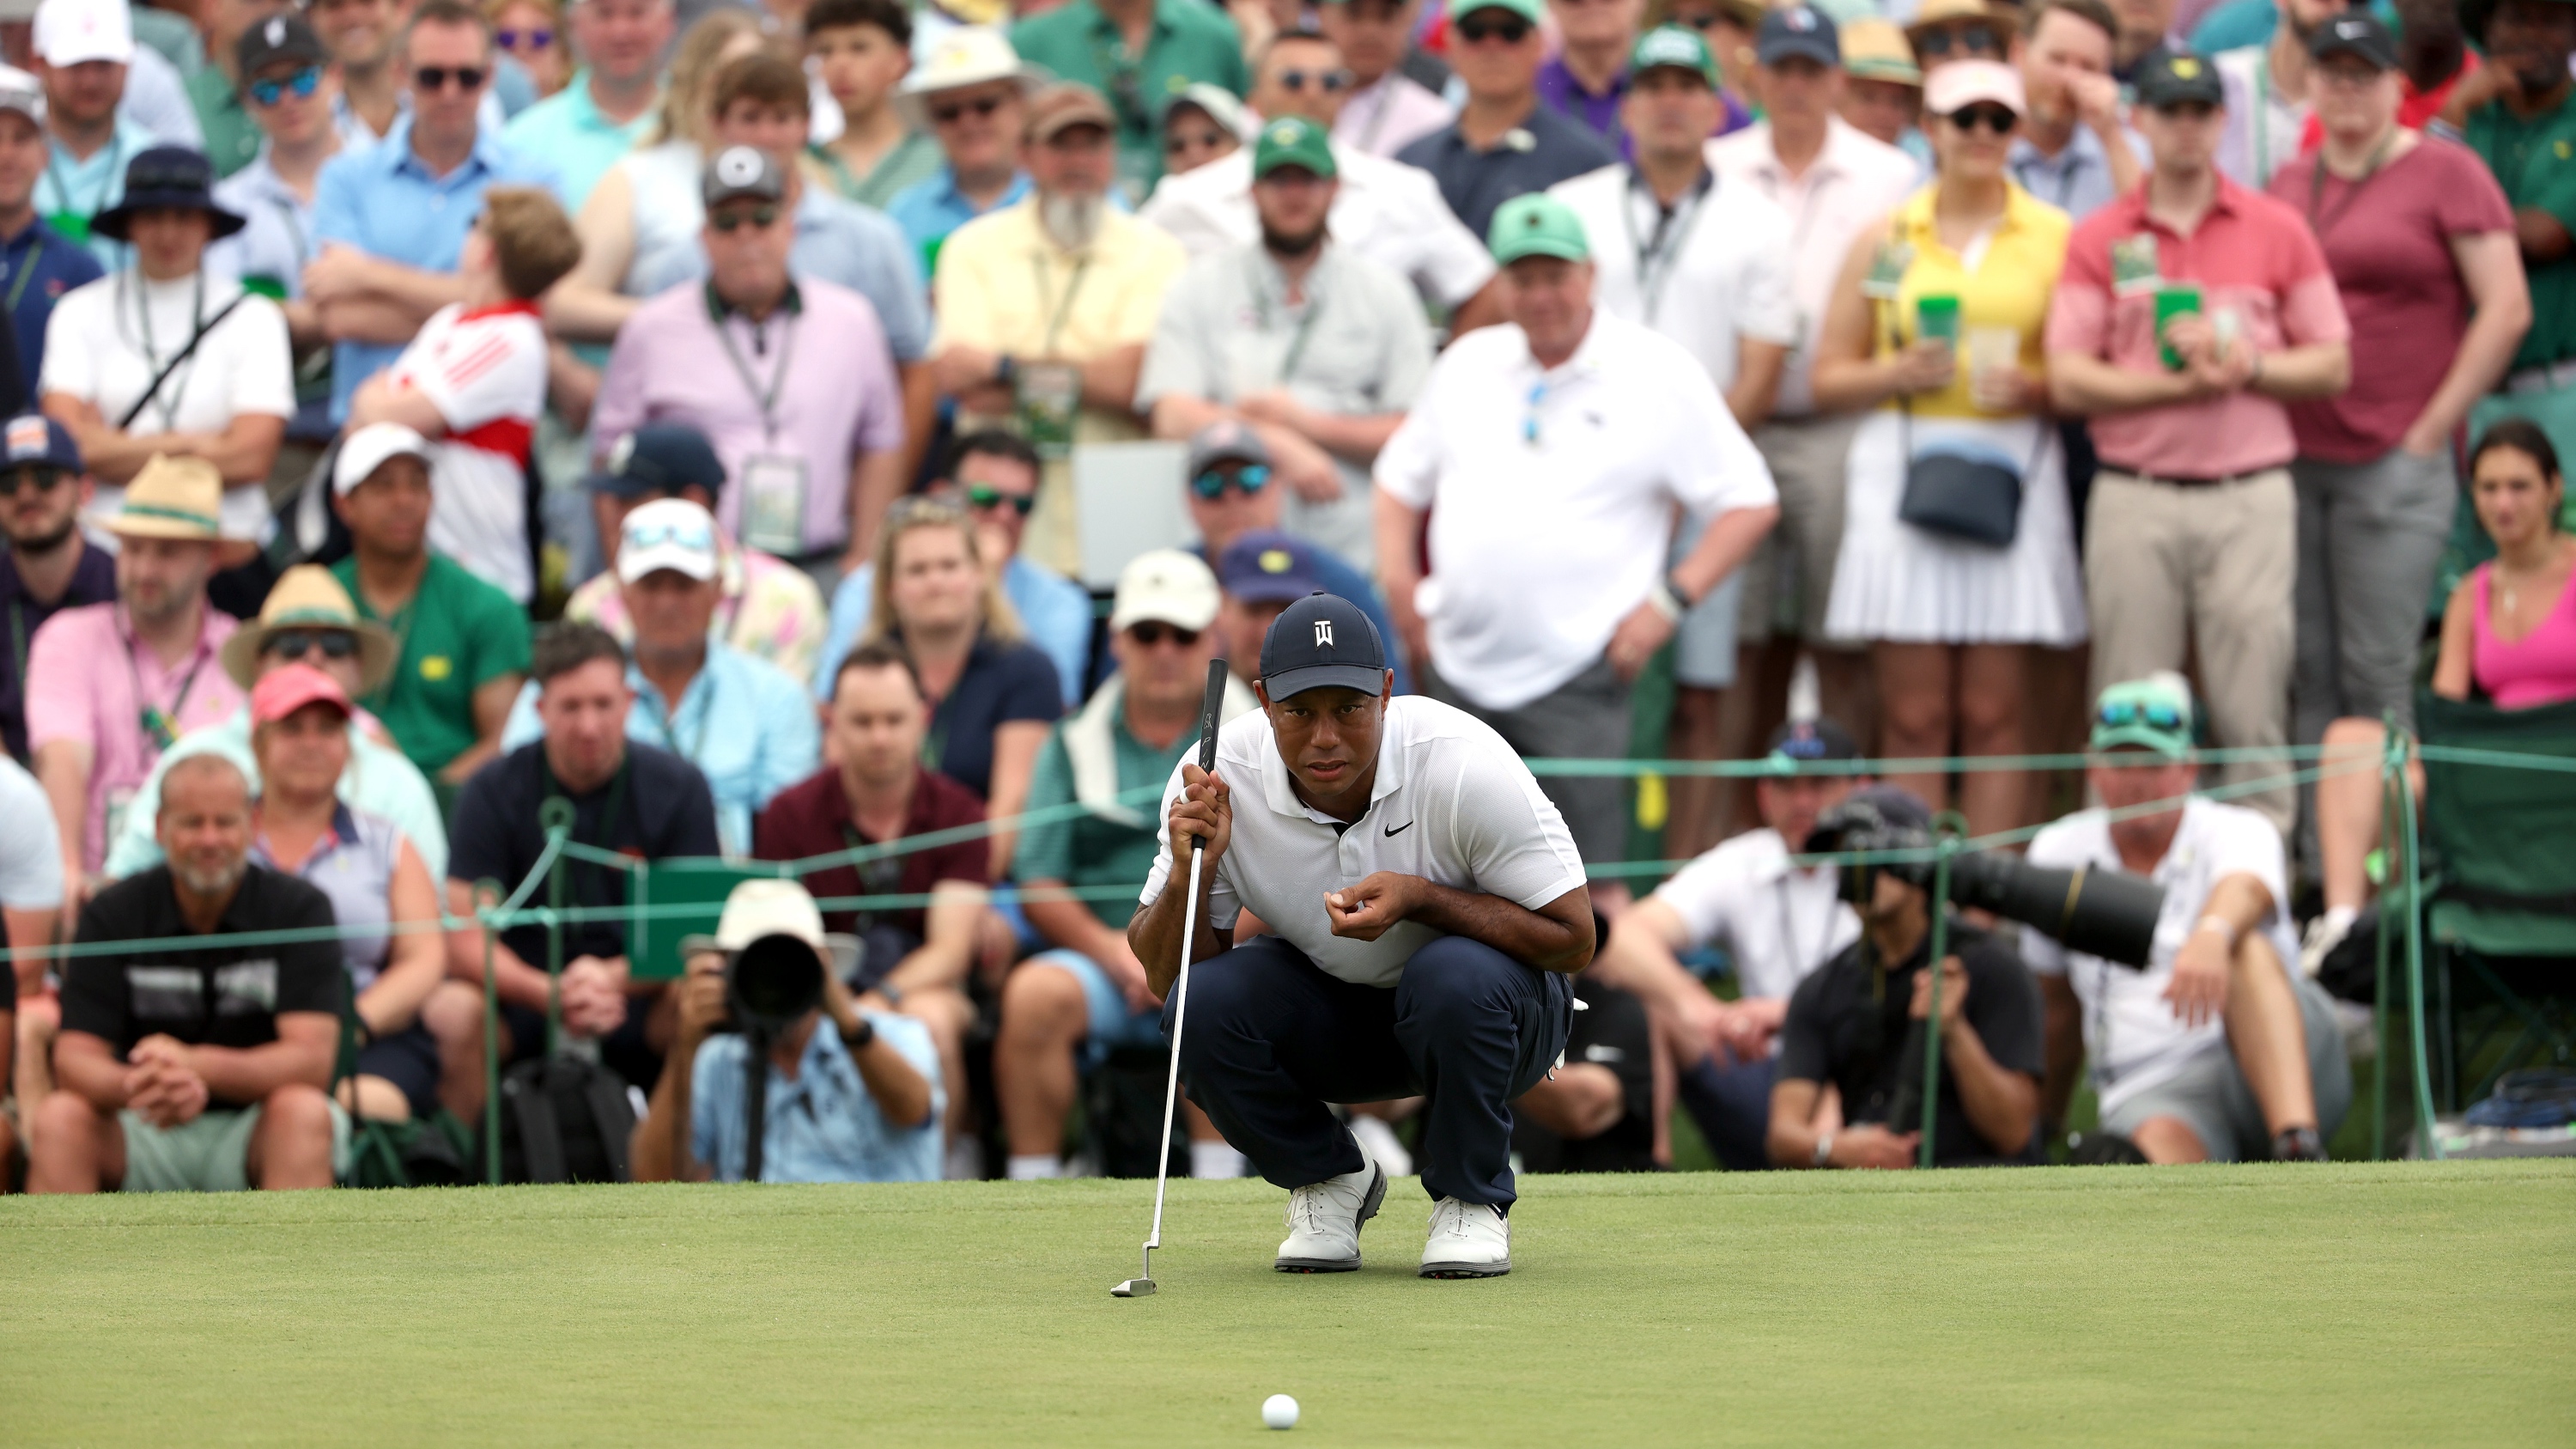 Tiger Woods reading a putt at The Masters